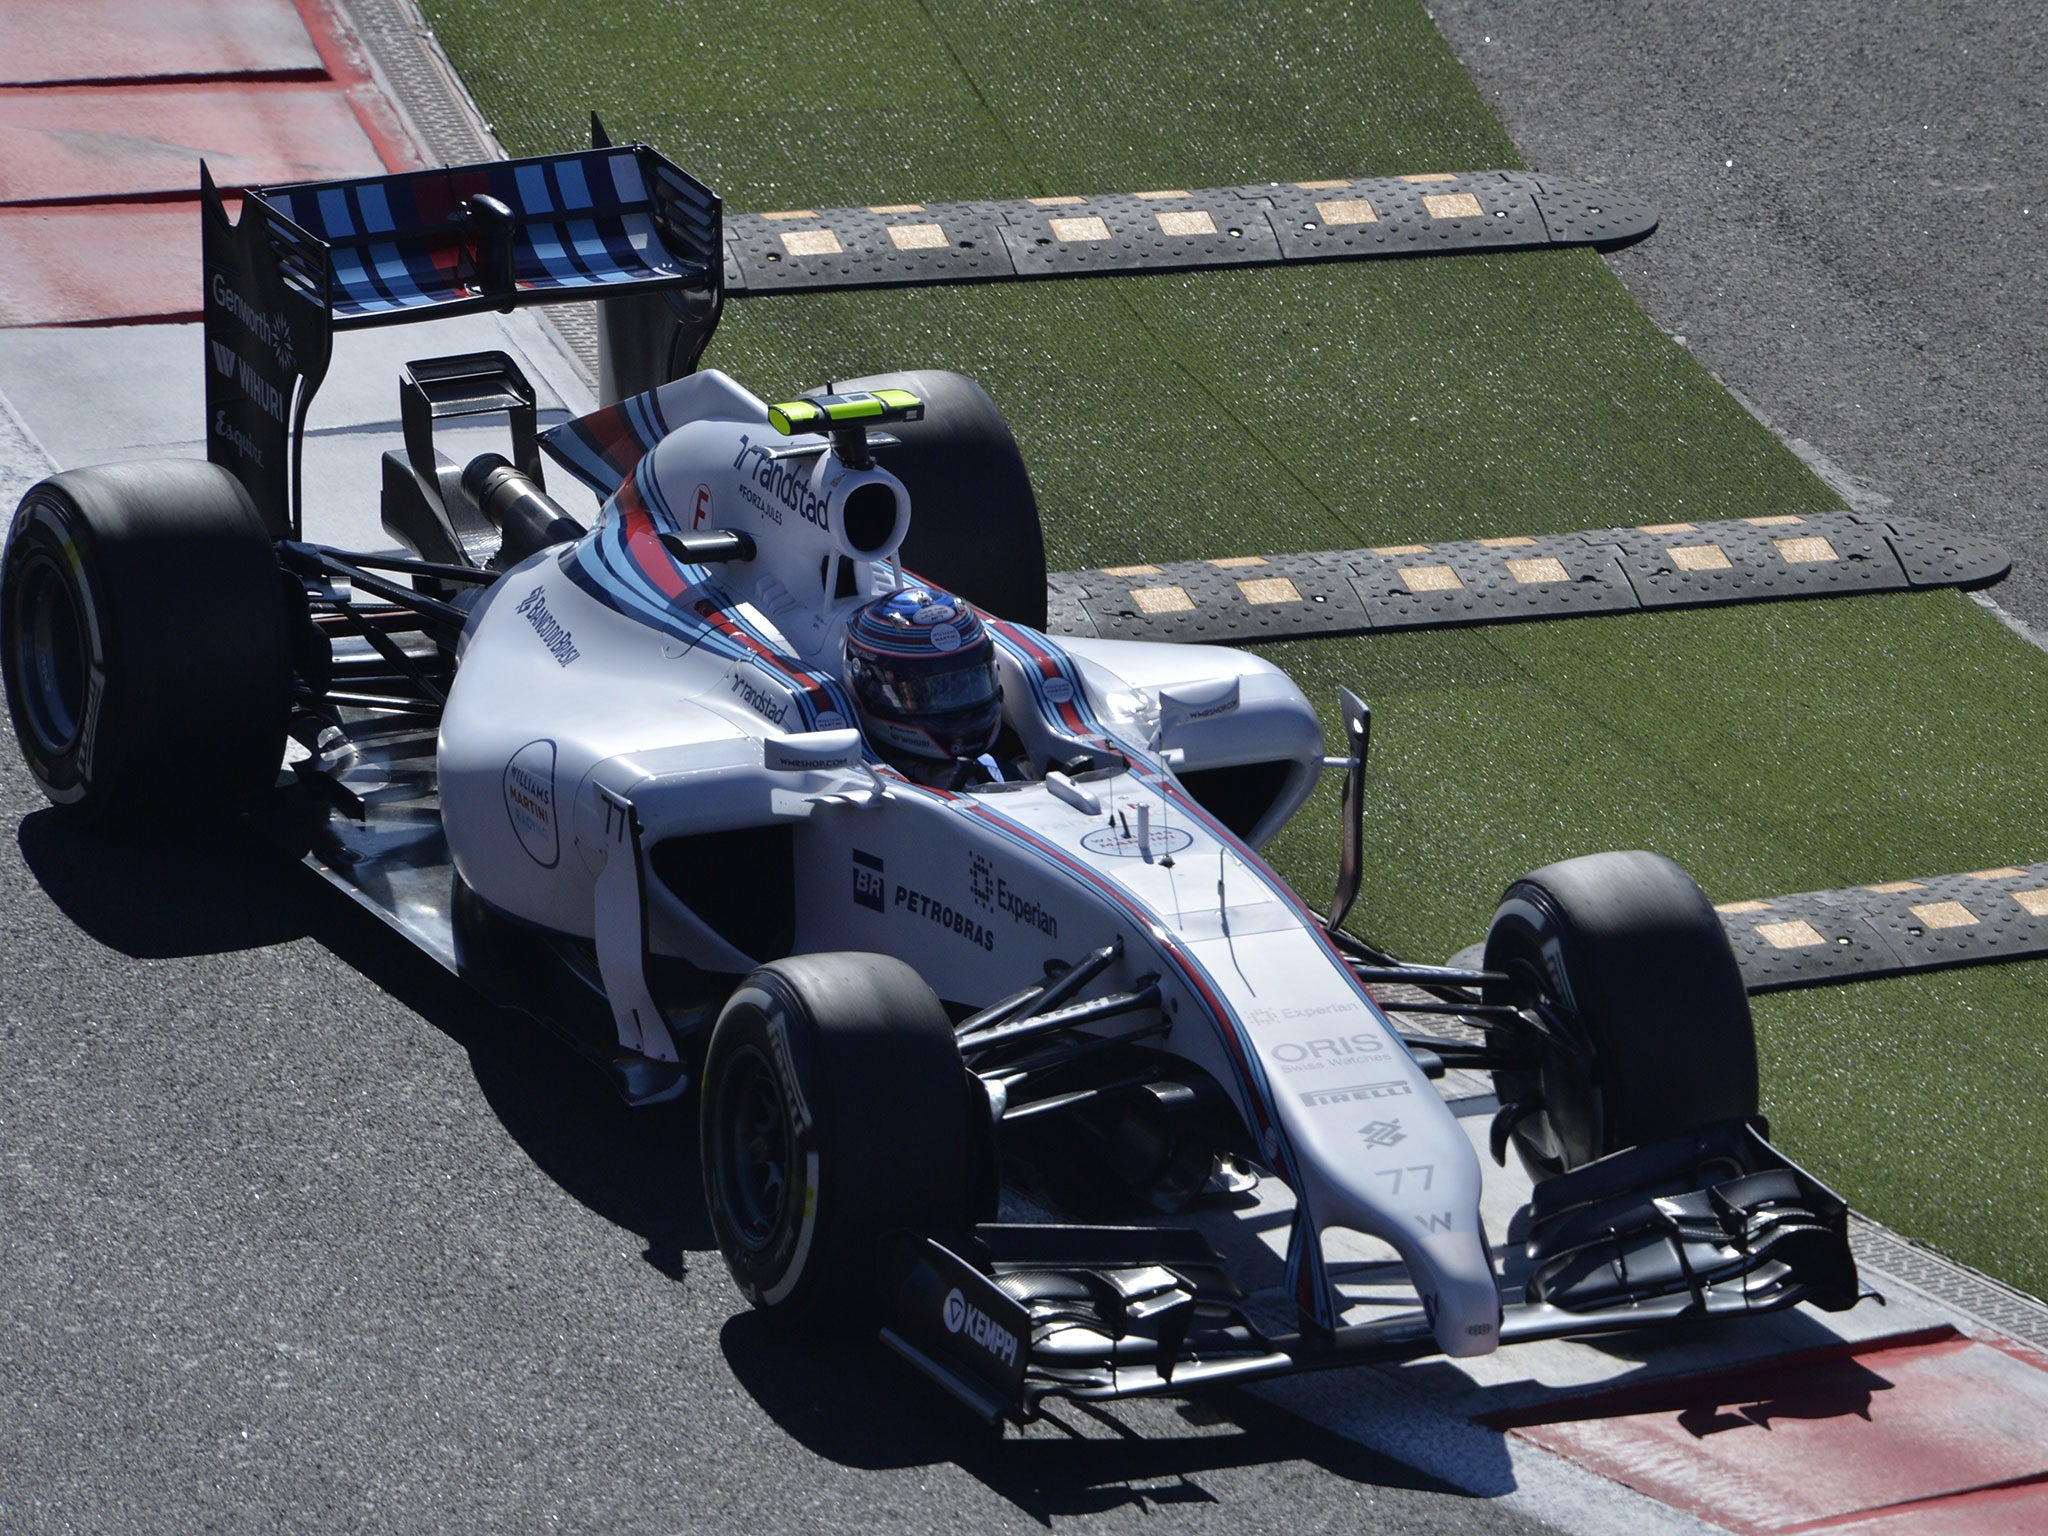 Valtteri Bottas negotiates the newly-installed speed bumps at turn two